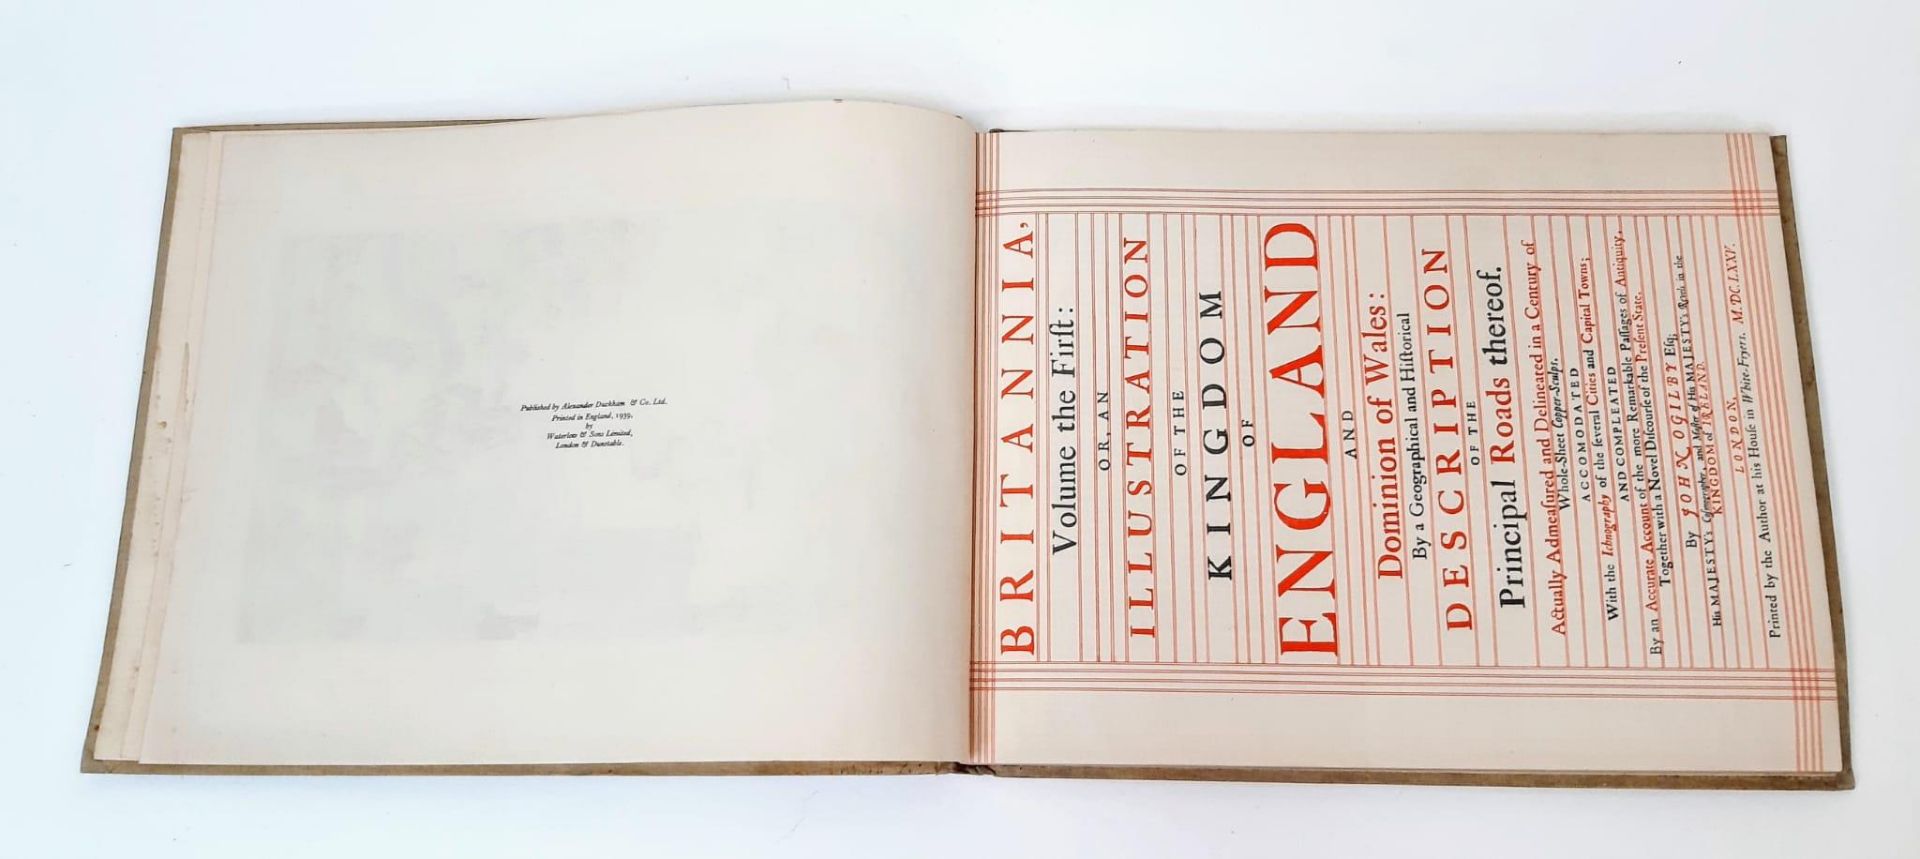 A 1939 REPRINT OF THE "BRITANNIA FIRST VOLUME OF THE KINGDOM OF ENGLAND AND THE DOMINION OF WALES" - Image 3 of 11